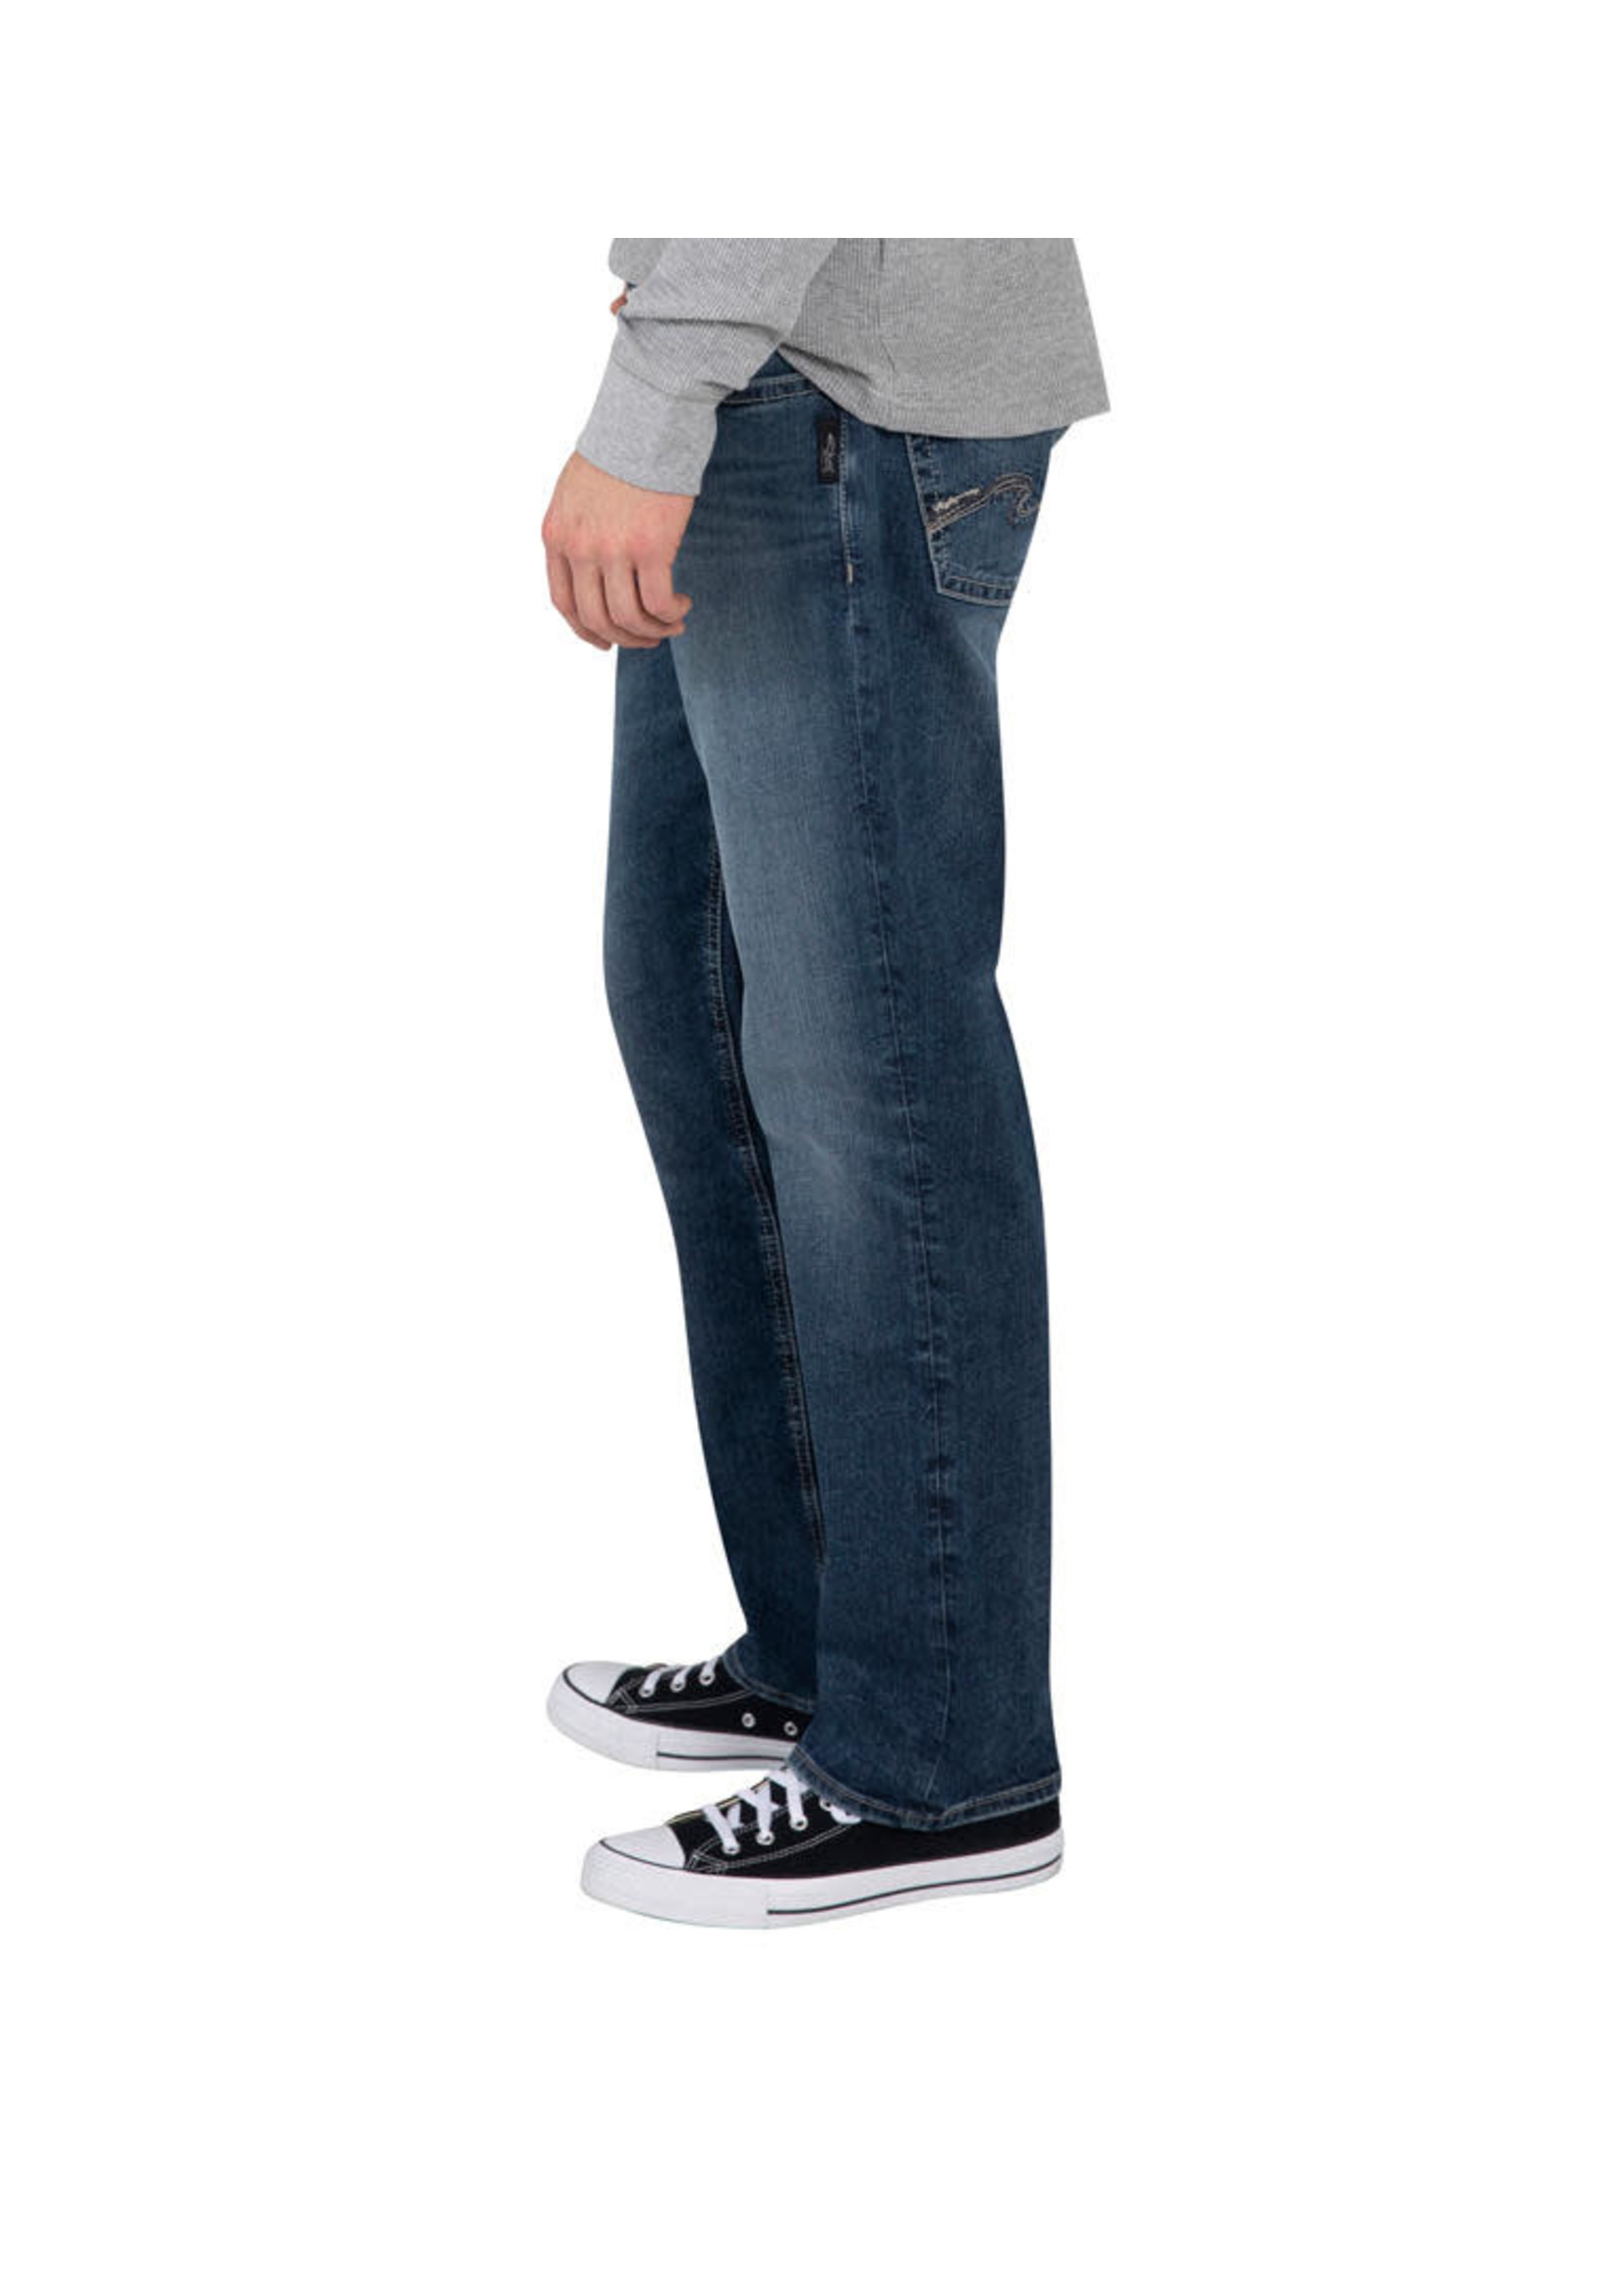 Silver Jeans The "Grayson 360" by Silver Jeans